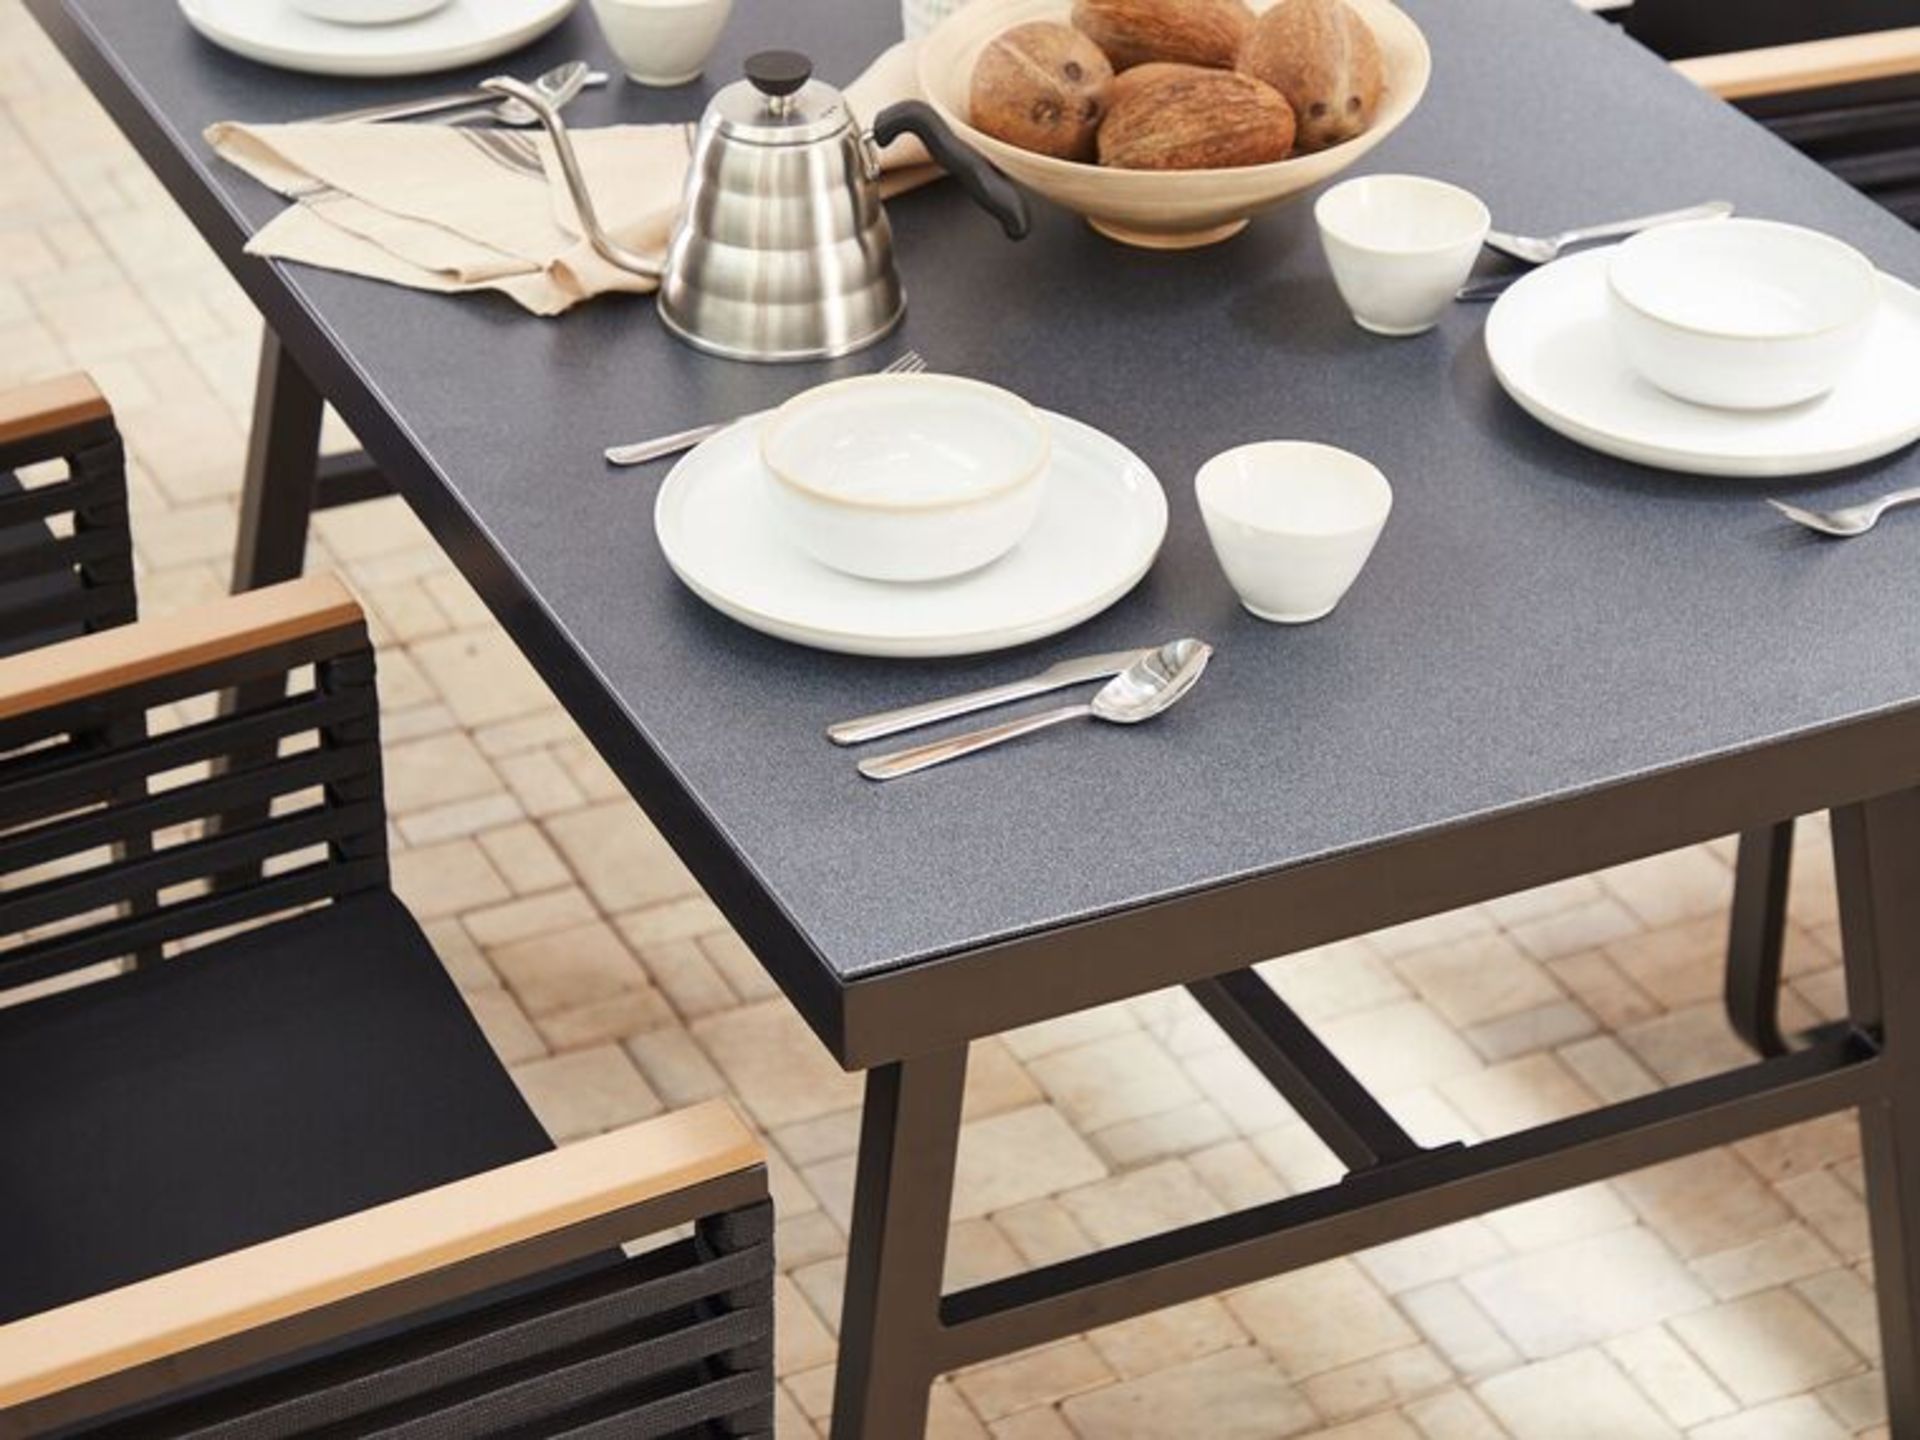 Canetto Metal Garden Dining Table 150 x 90 cm Black. - R14.8. RRP £429.99. This modern table in - Image 2 of 2